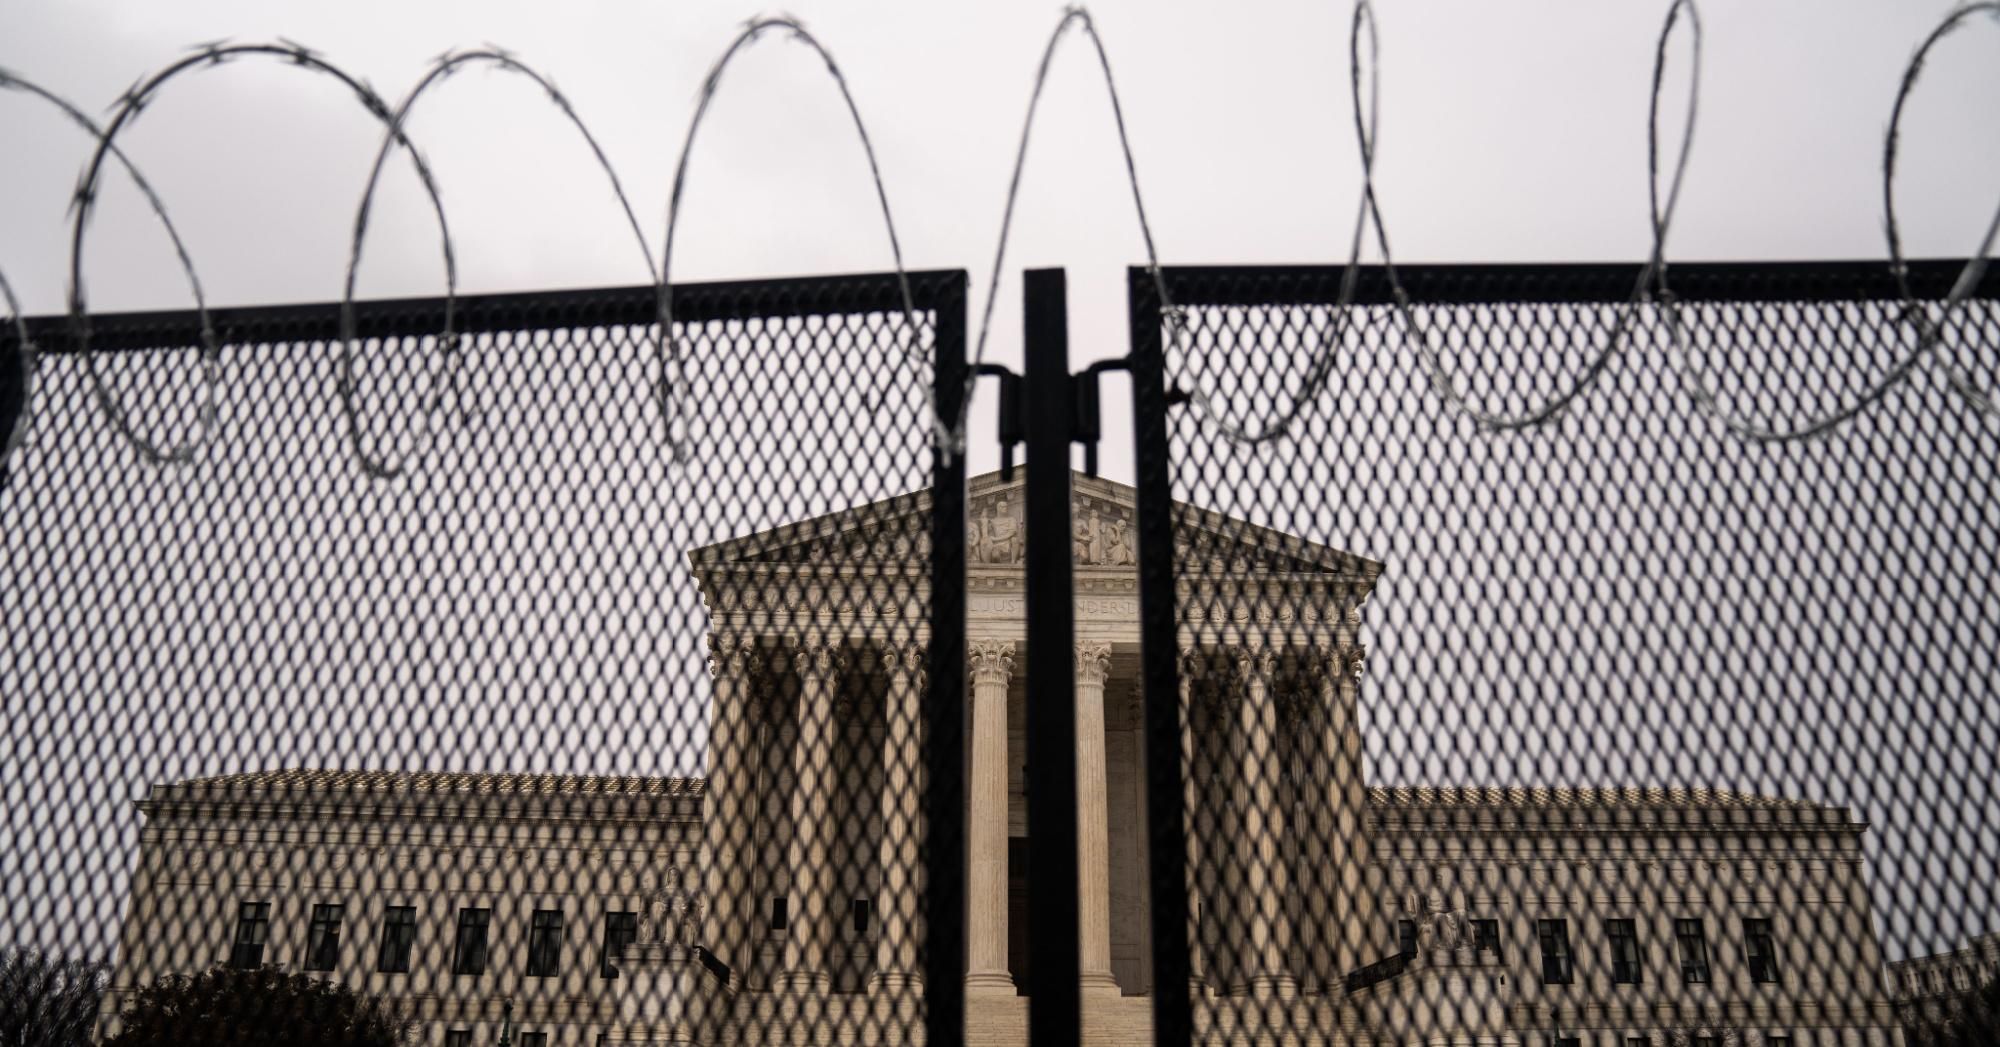 Razor wire-topped fencing is seen surrounding the Supreme Court of the United States on Monday, February 22, 2021 in Washington, D.C. (Photo: Kent Nishimura / Los Angeles Times via Getty Images)